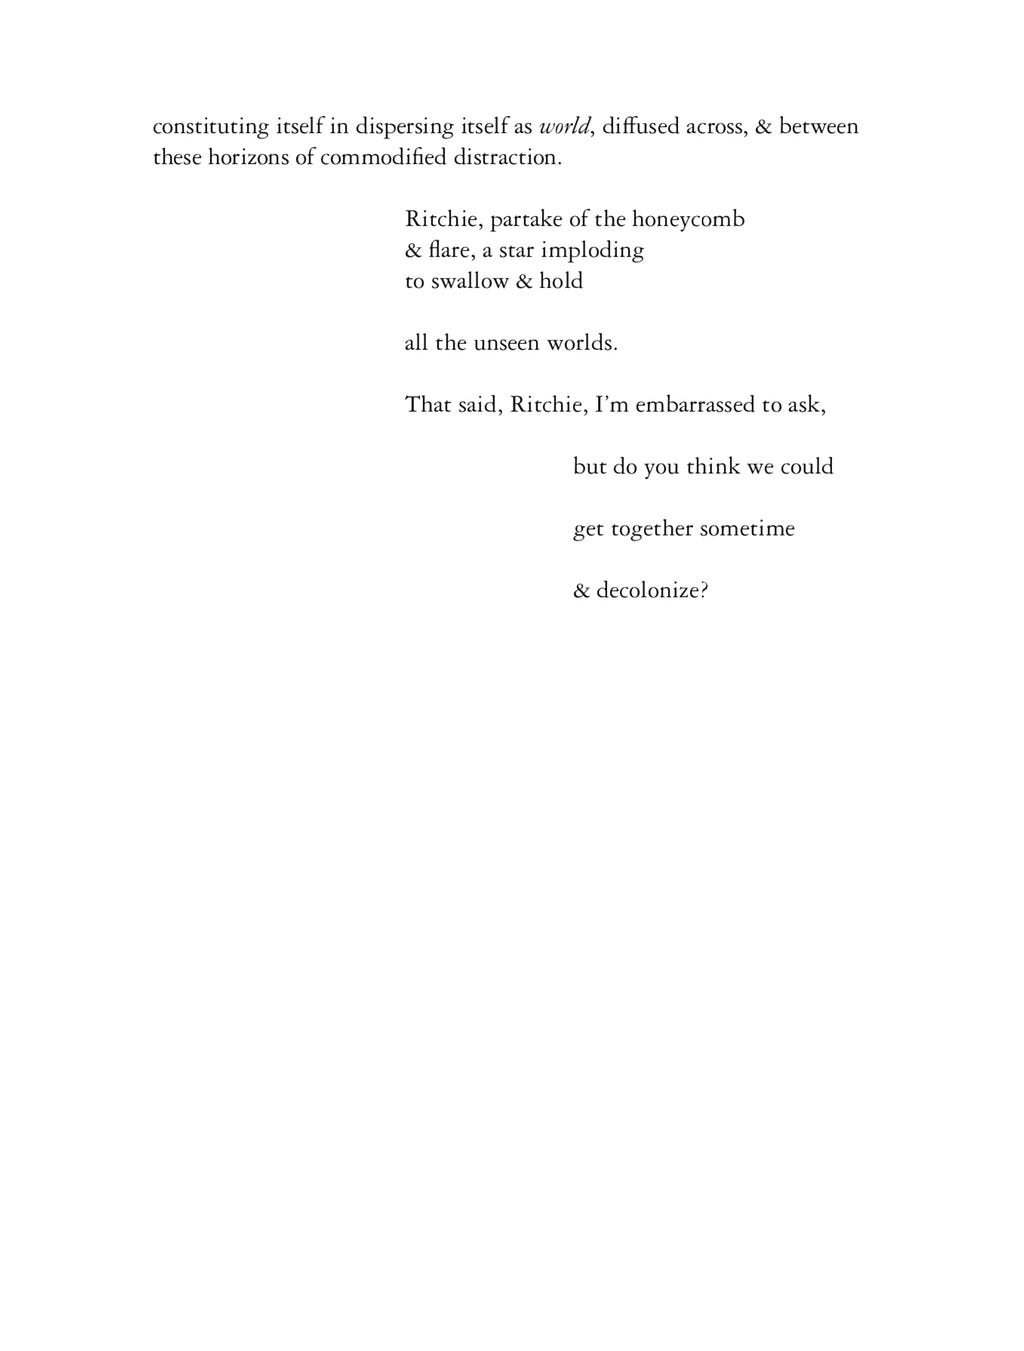 Page 3 out of 3, J. Michael Martinez’ poem Letter XVII. Posted as PDF to preserve unique layout of poem. For accessible text see below images.